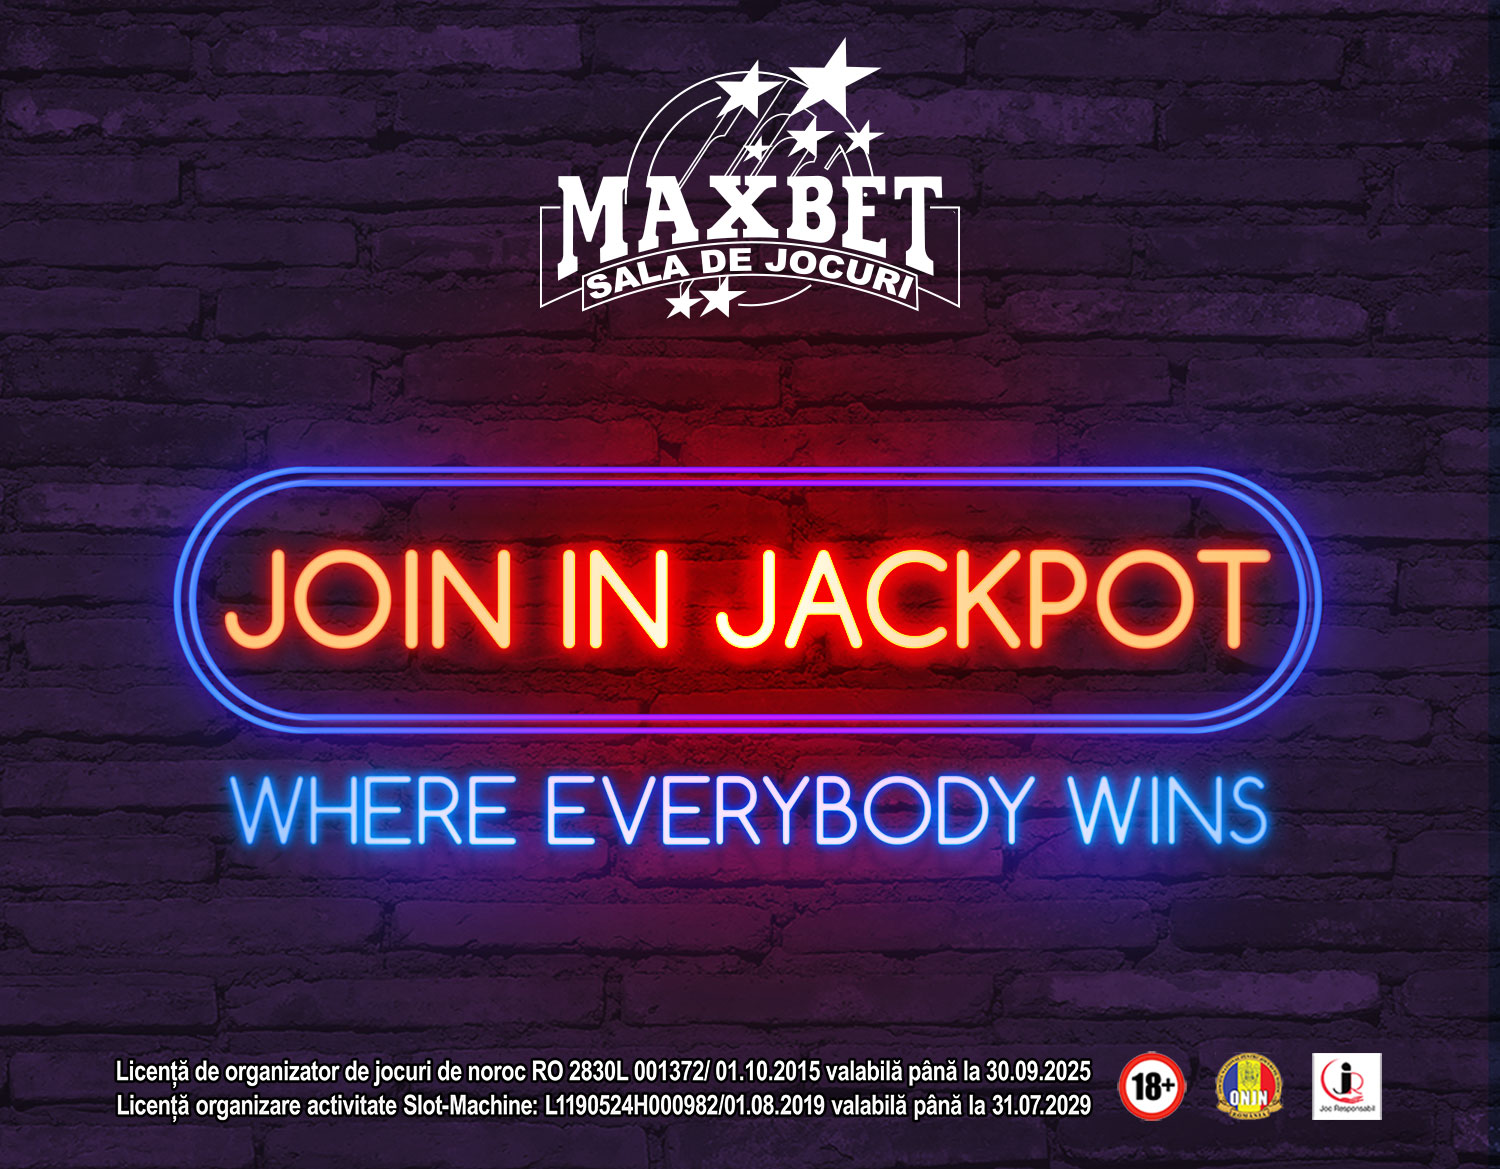 “Join IN Jackpot”